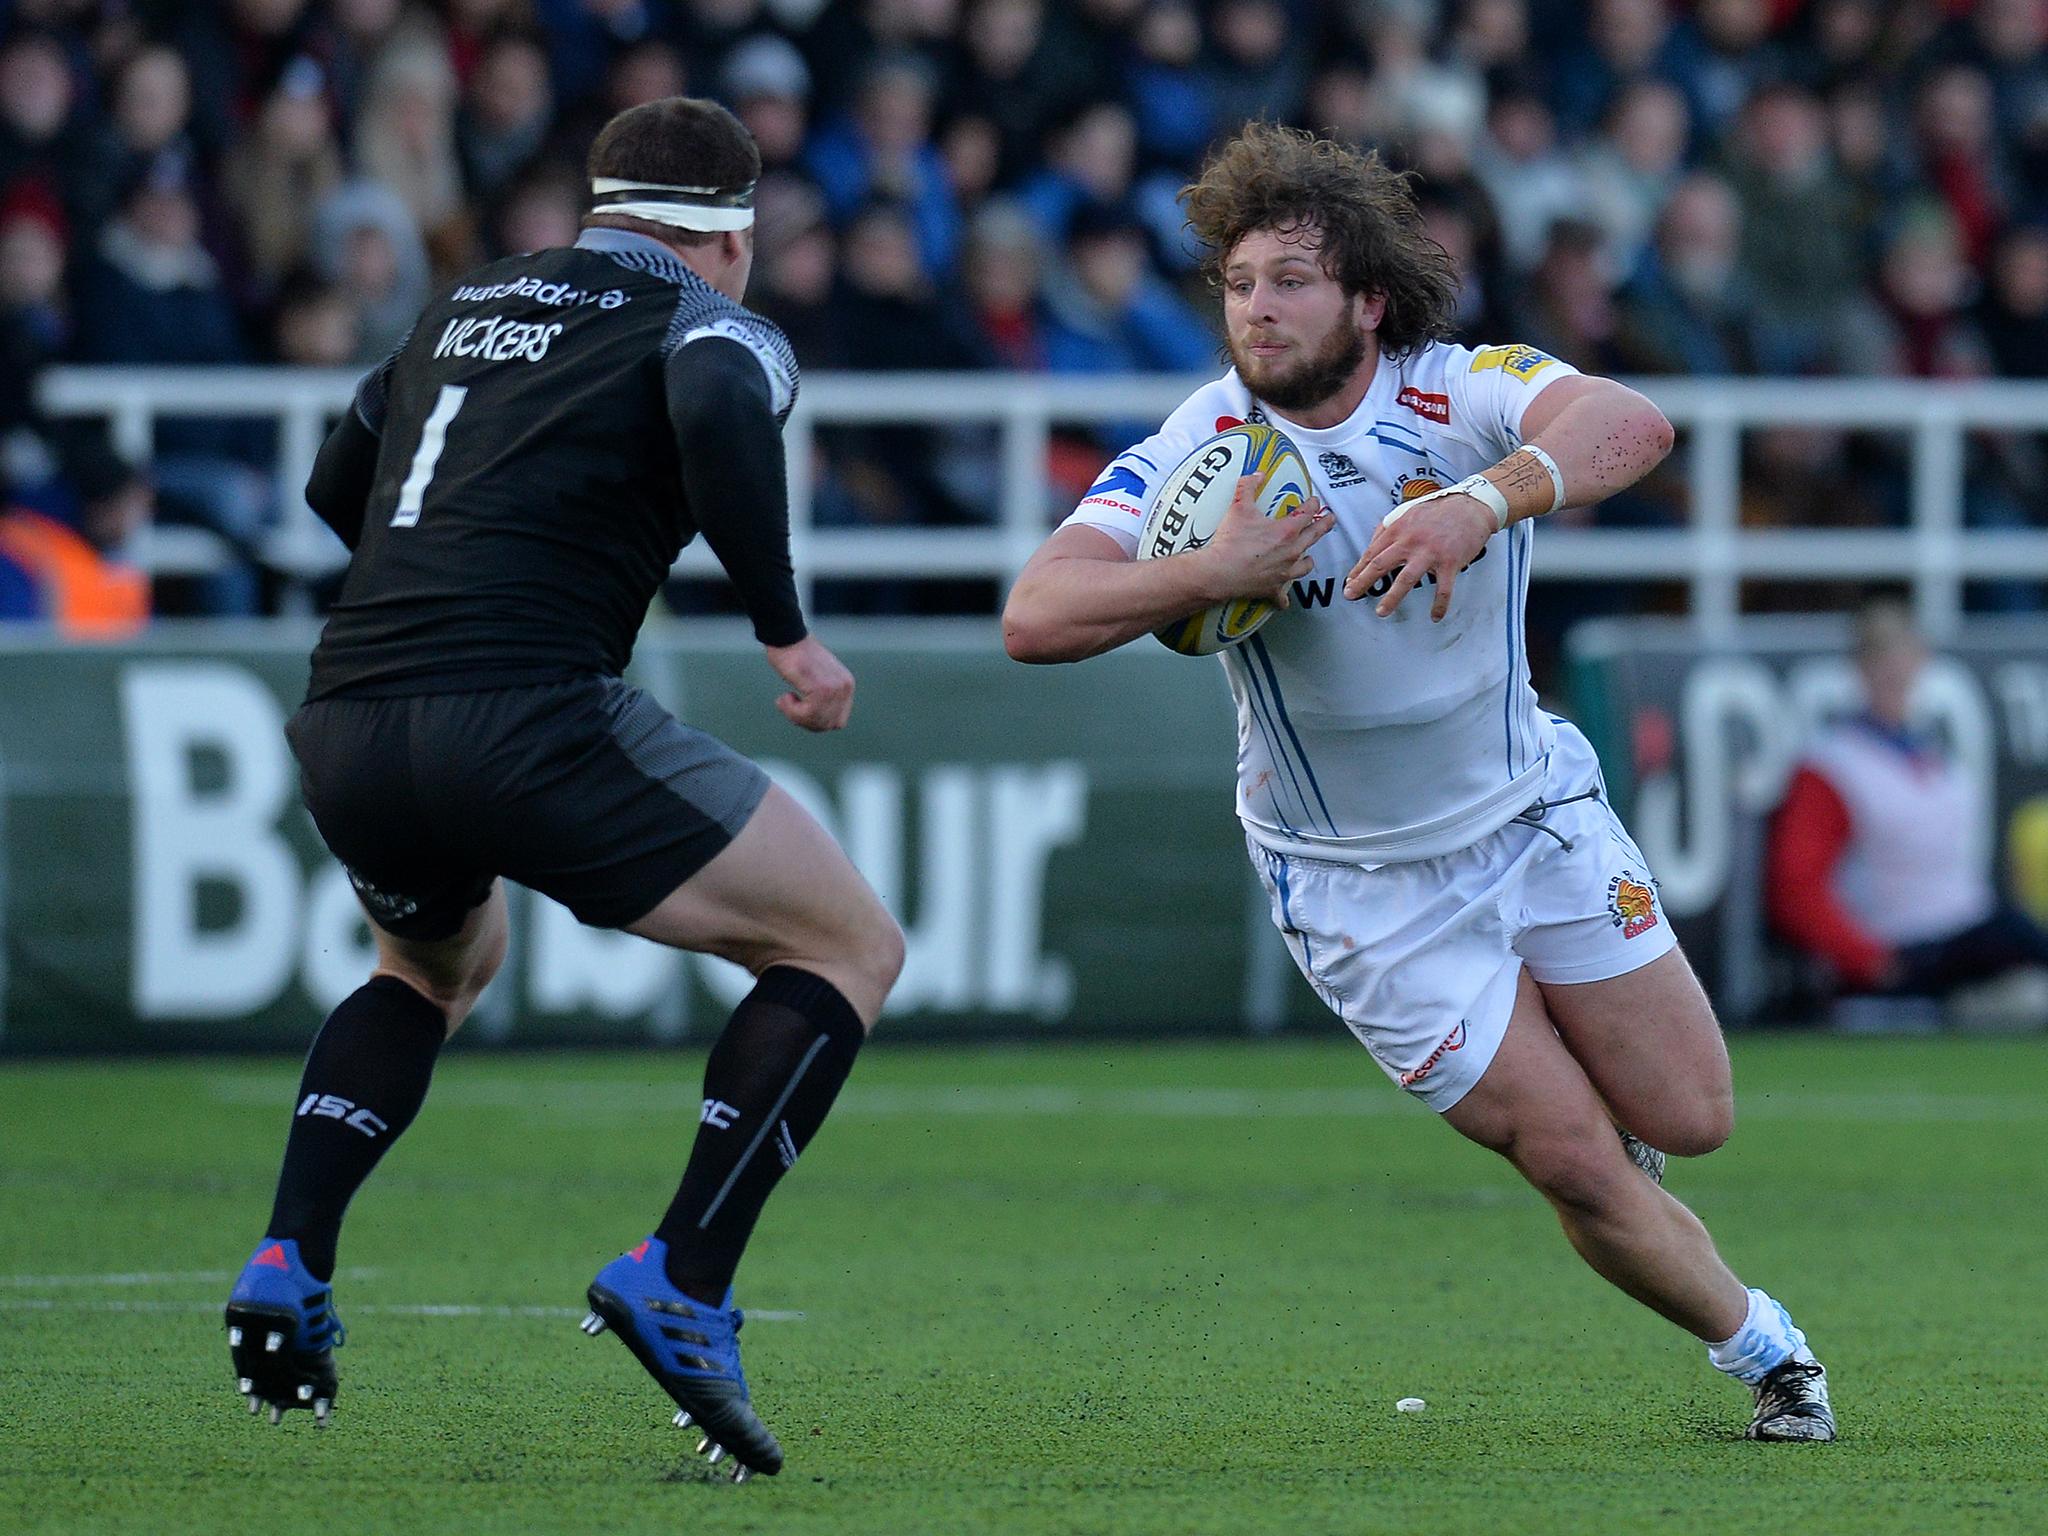 Hepburn has impressed with Exeter over the last 18 months